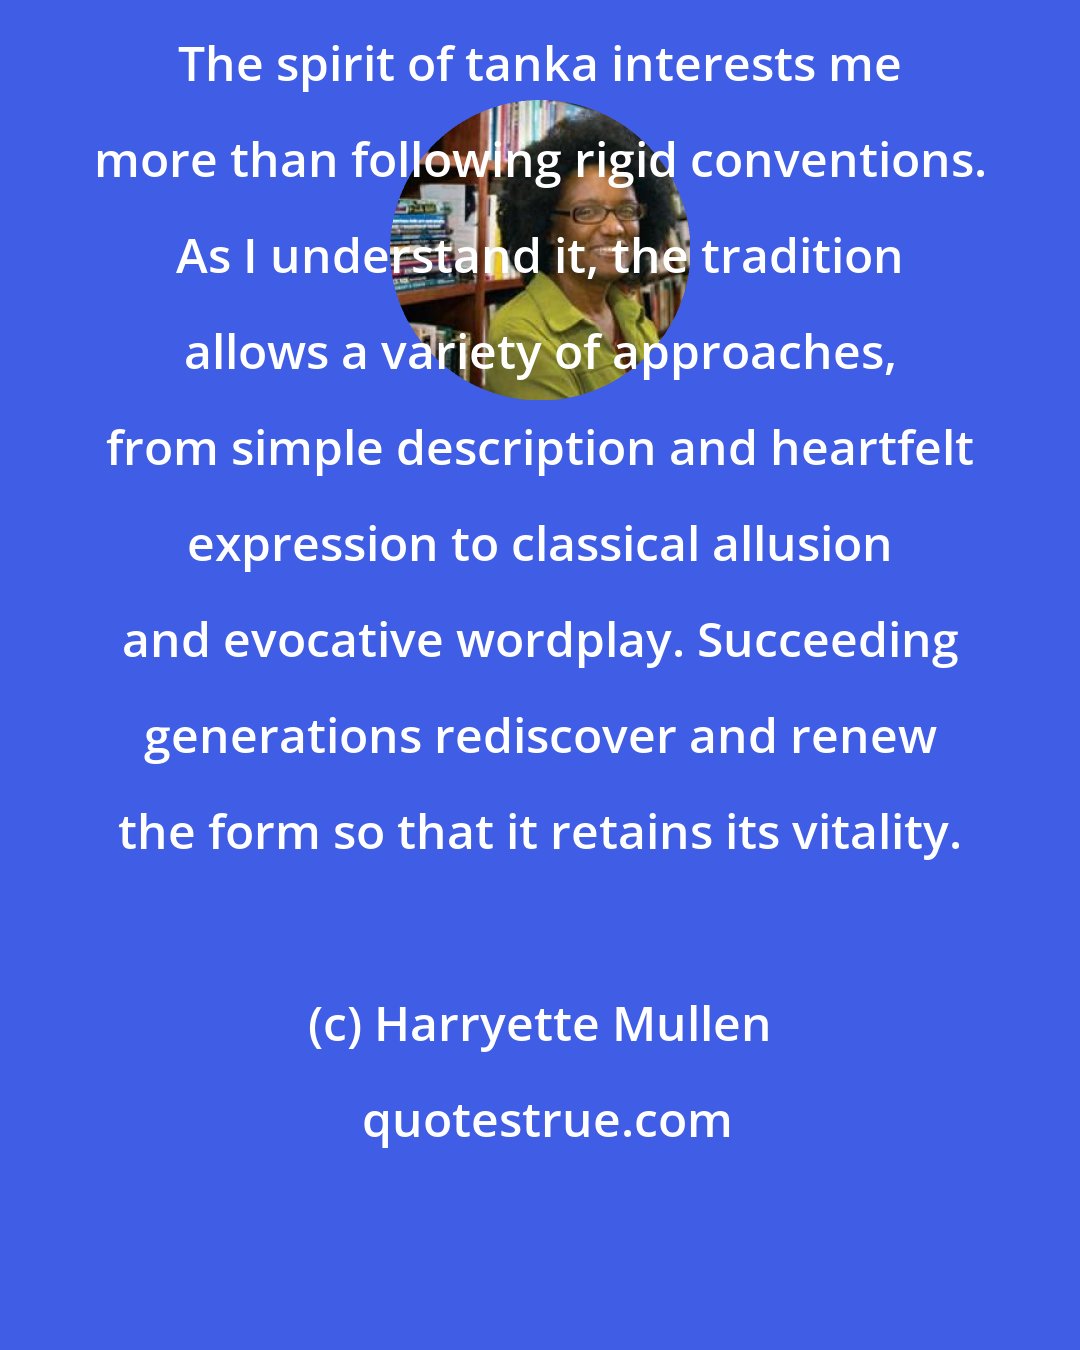 Harryette Mullen: The spirit of tanka interests me more than following rigid conventions. As I understand it, the tradition allows a variety of approaches, from simple description and heartfelt expression to classical allusion and evocative wordplay. Succeeding generations rediscover and renew the form so that it retains its vitality.